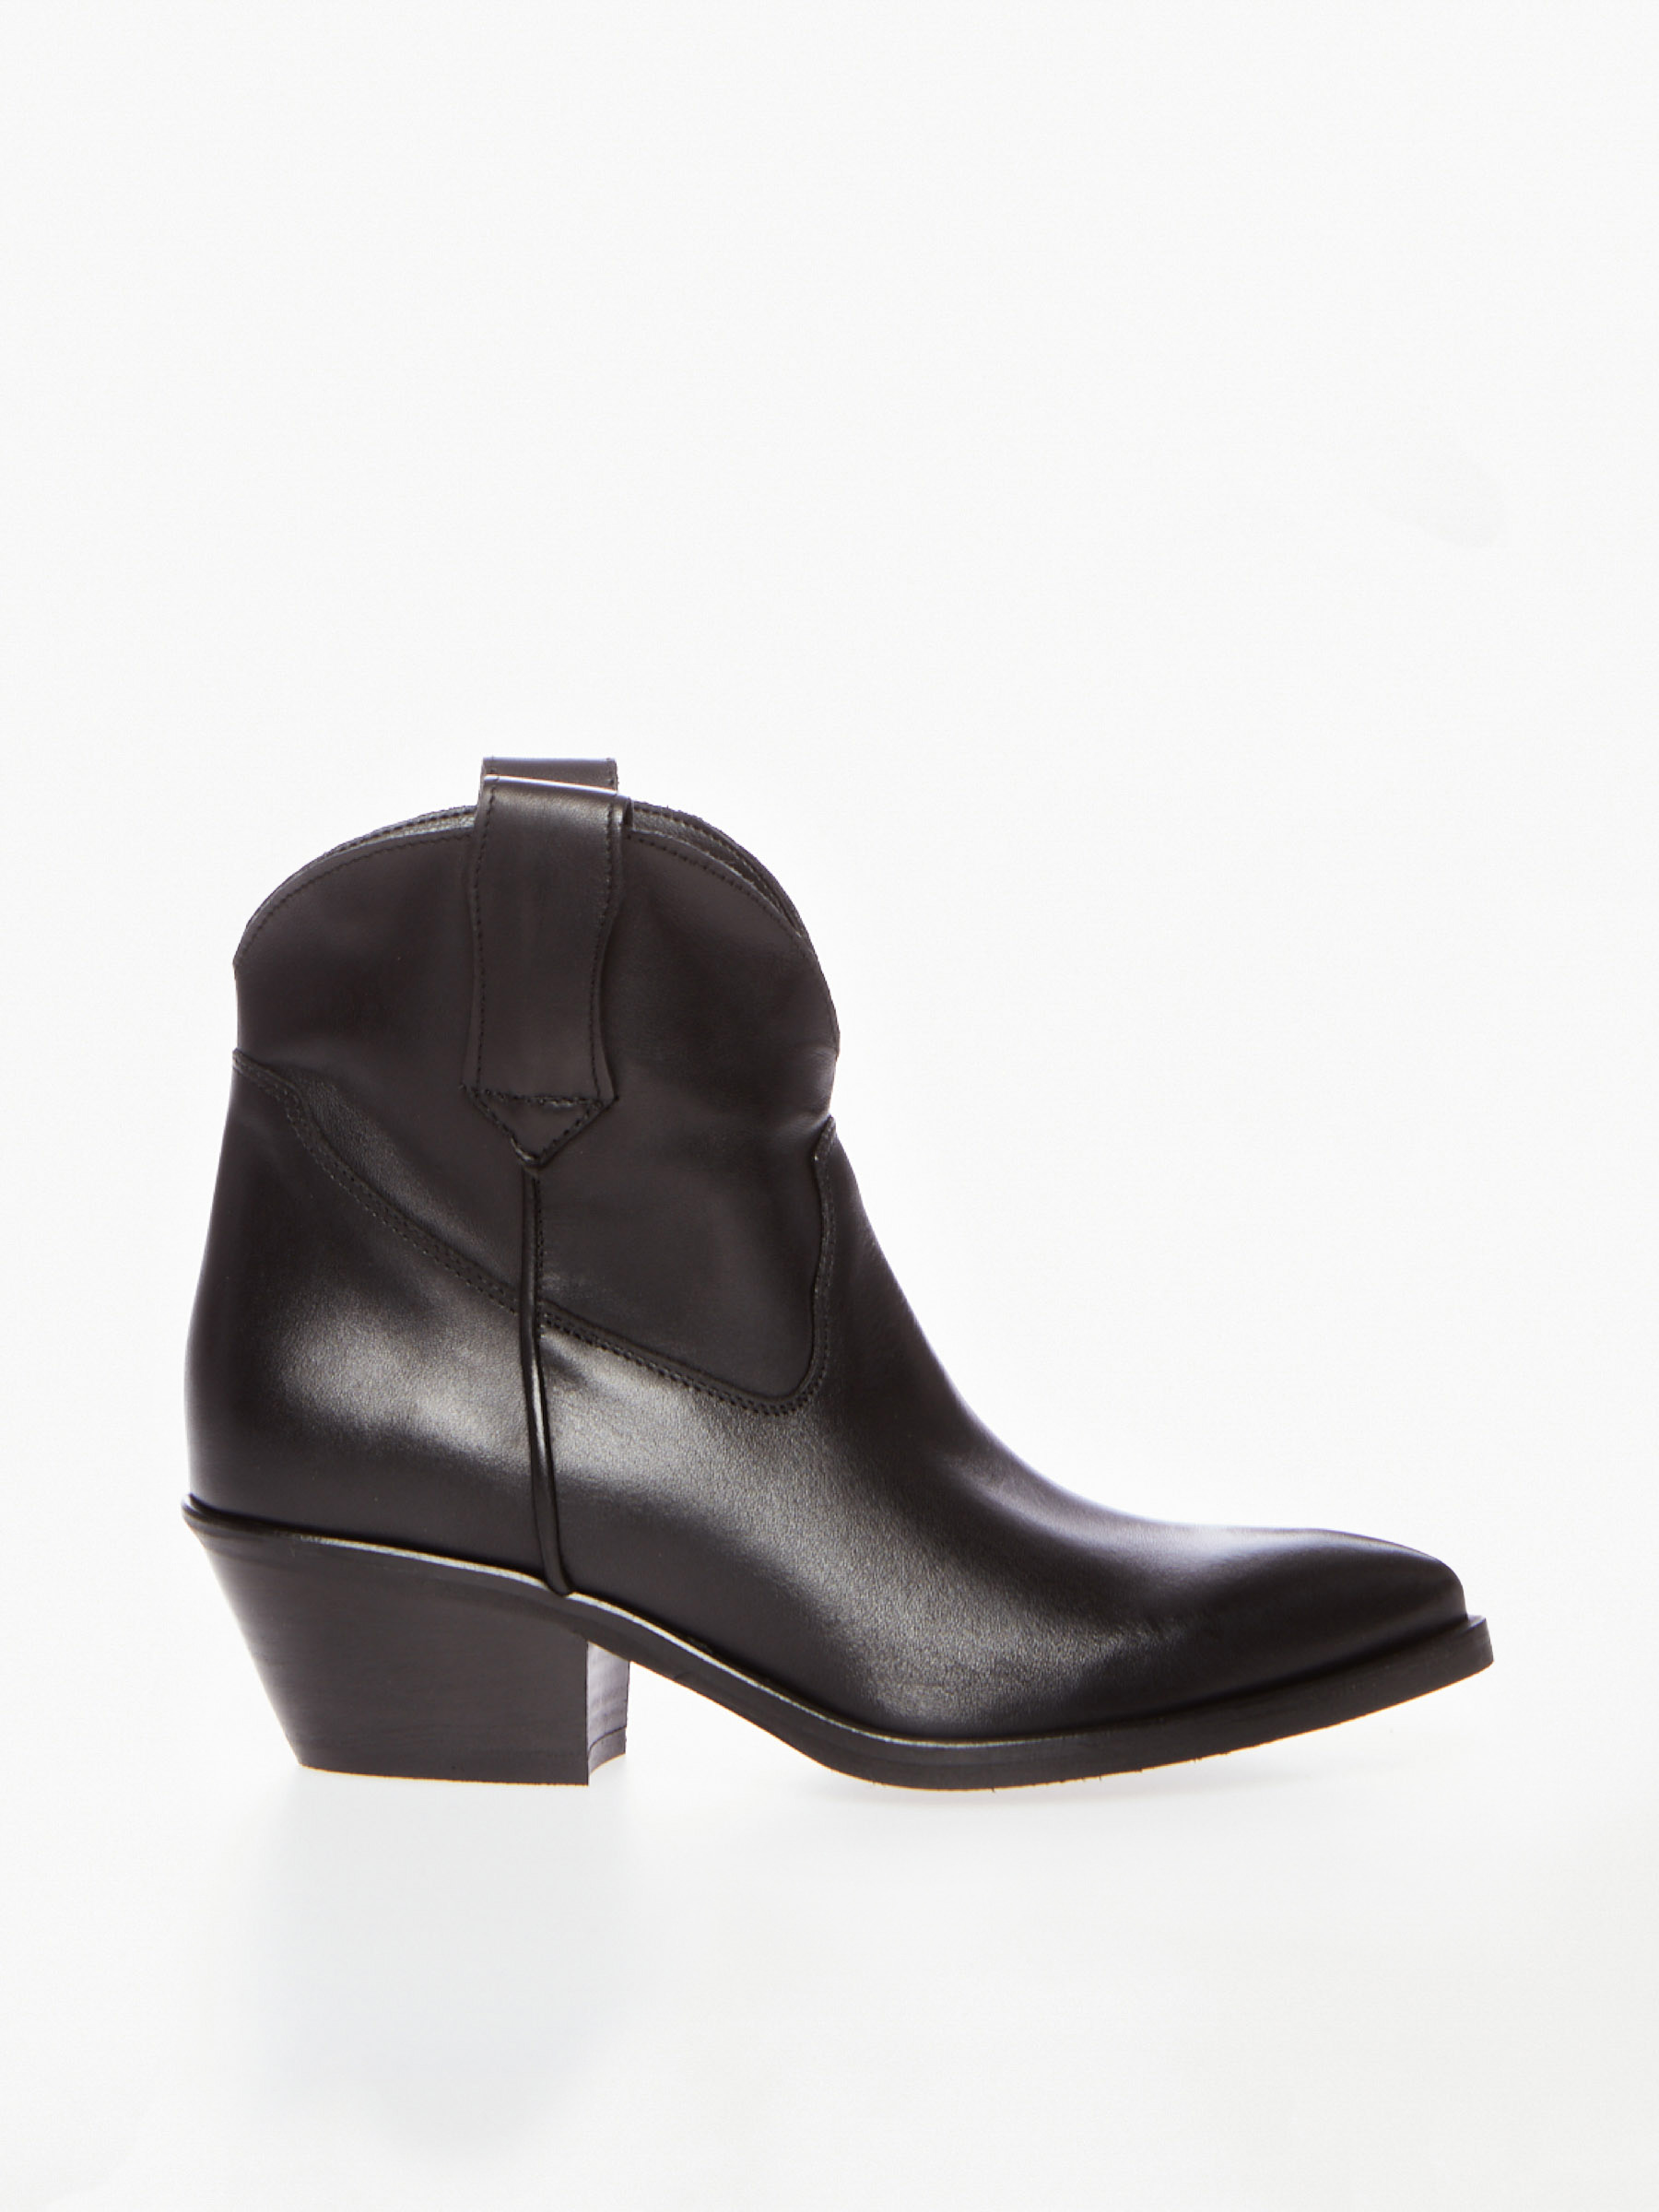 leather cowboy boot laia